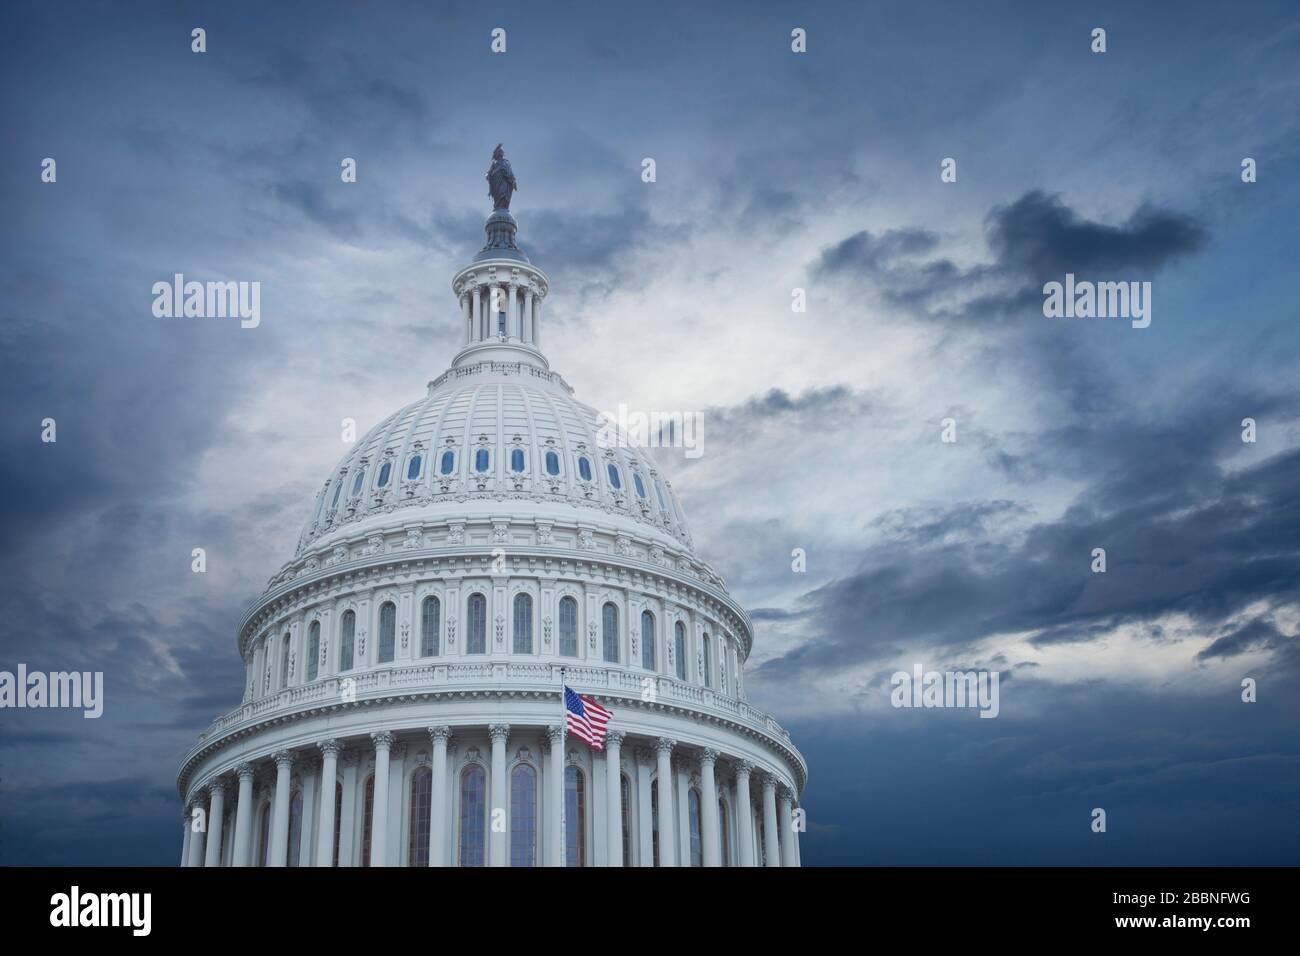 US Capitol dome under stormy skies Stock Photo